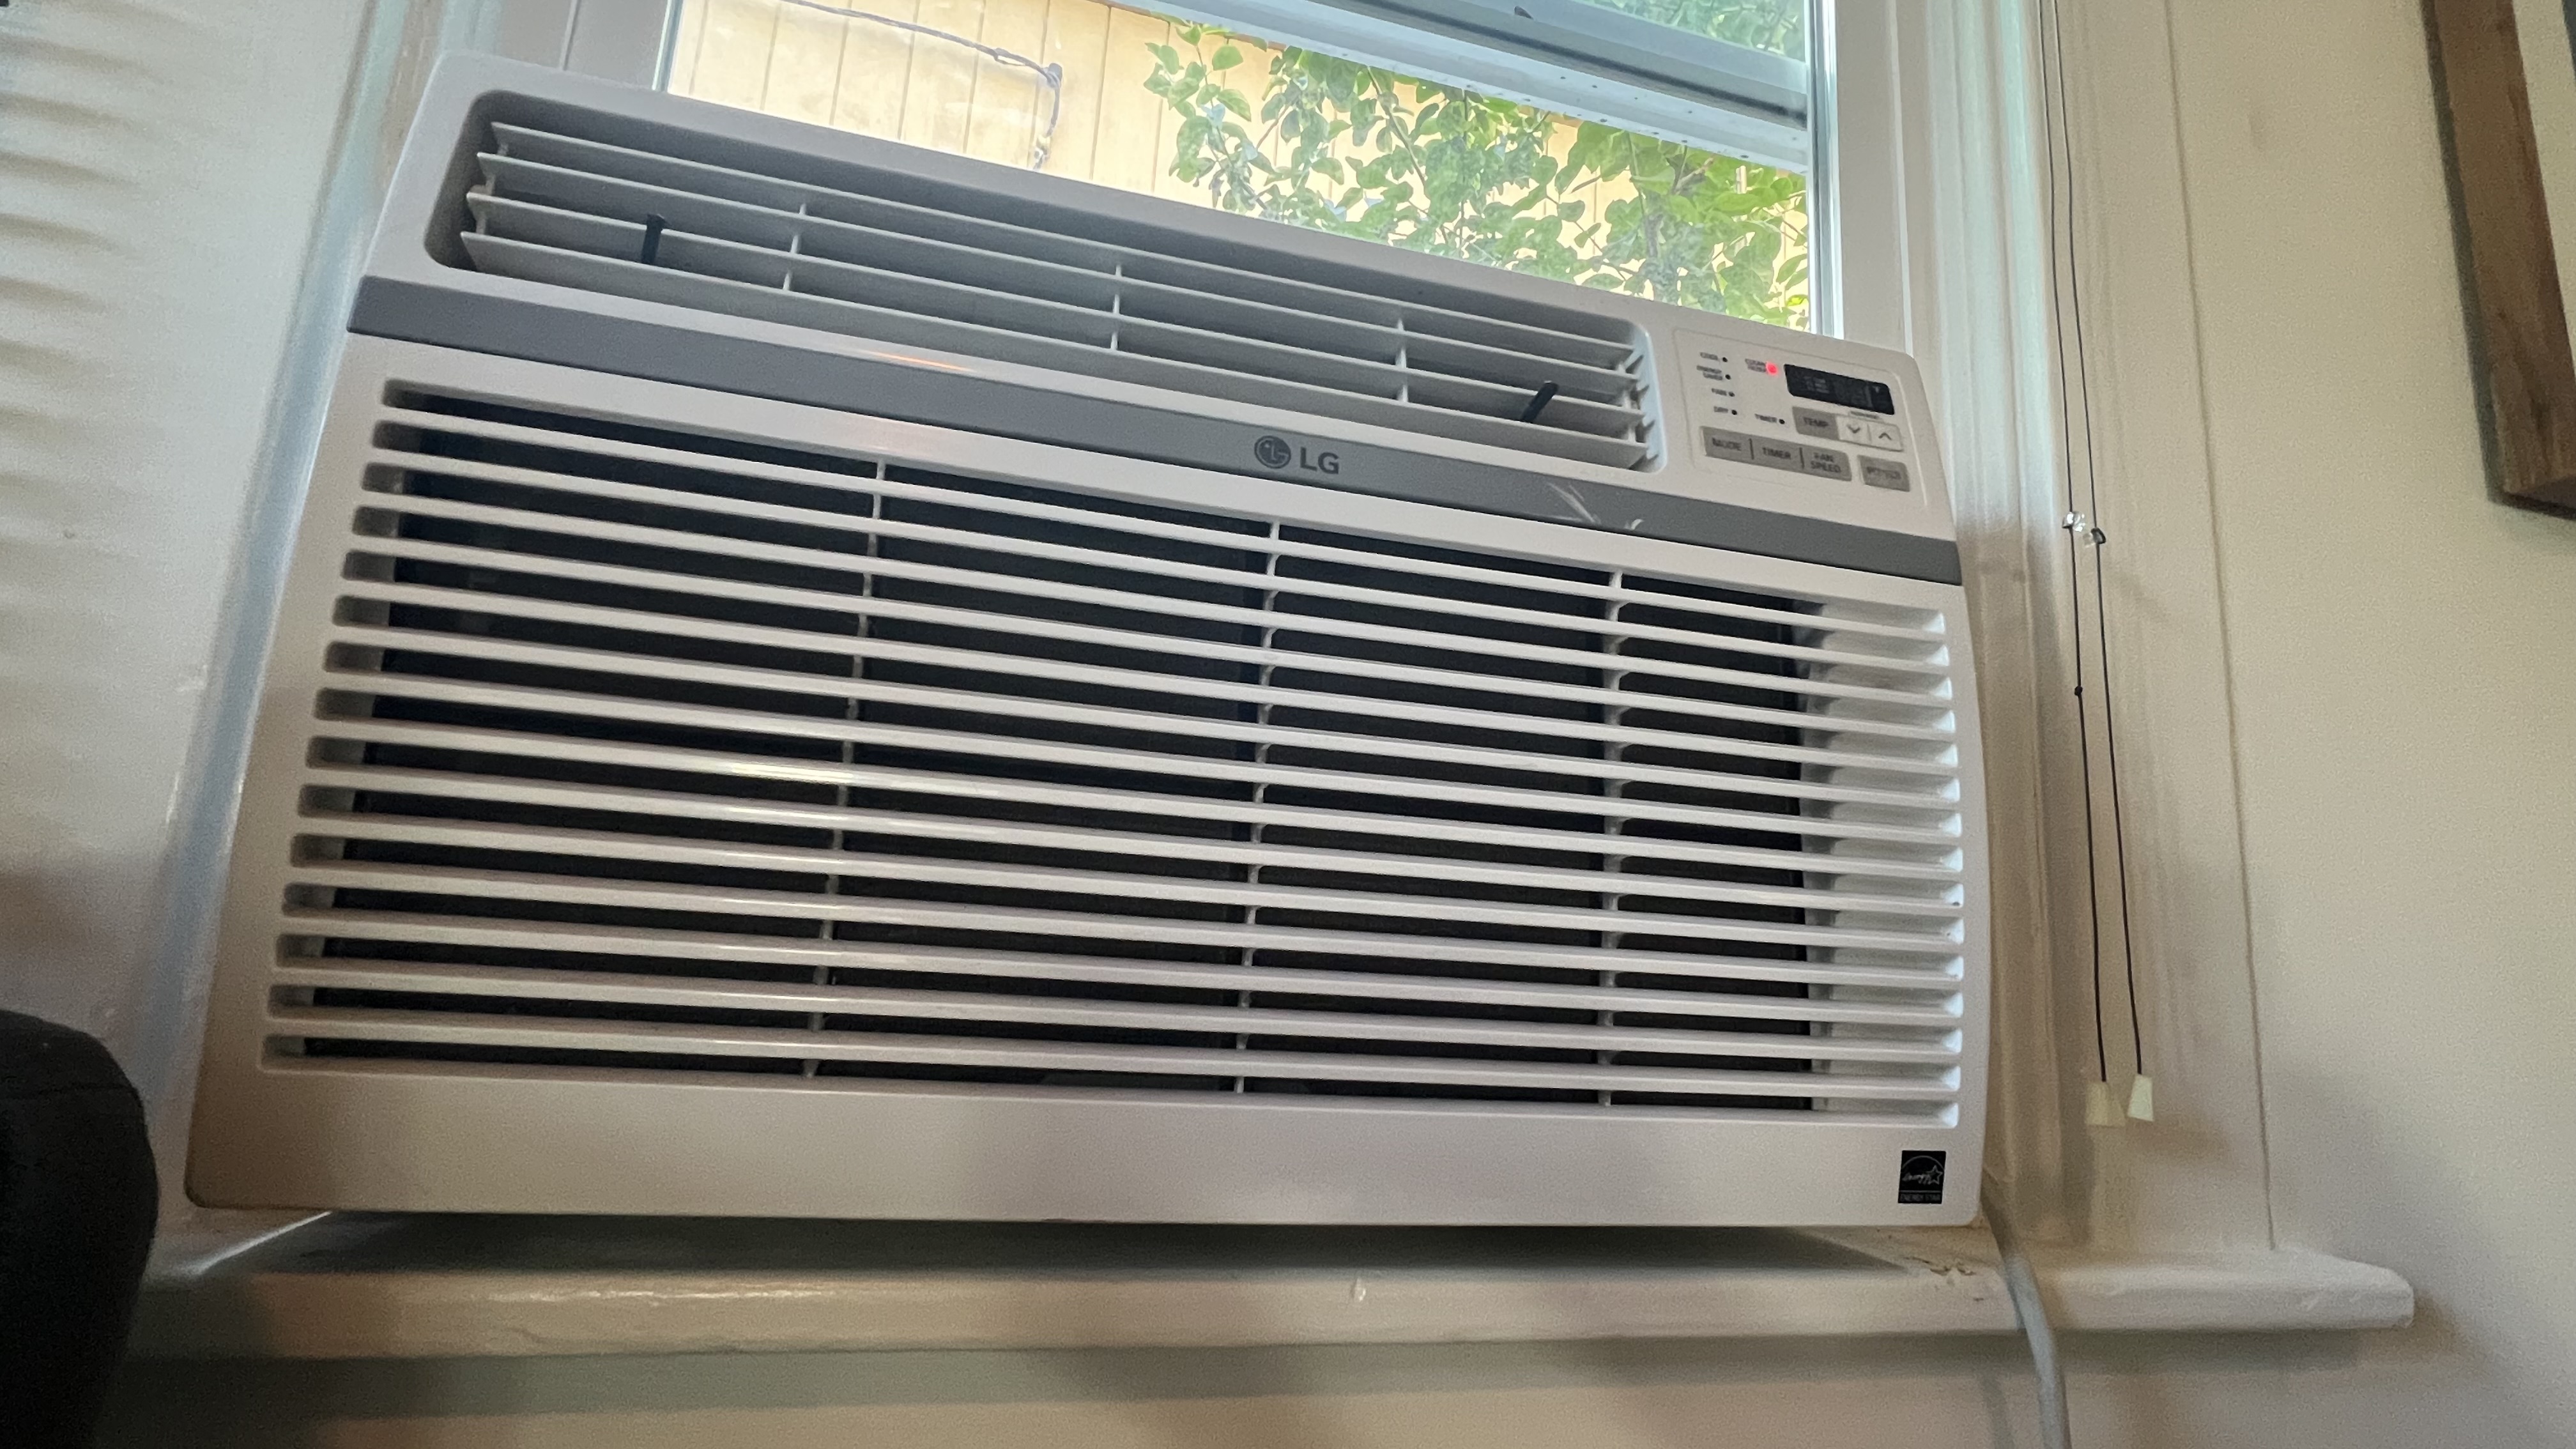 Hamilton set to offer $350 air-conditioning subsidy for low-income renters this summer